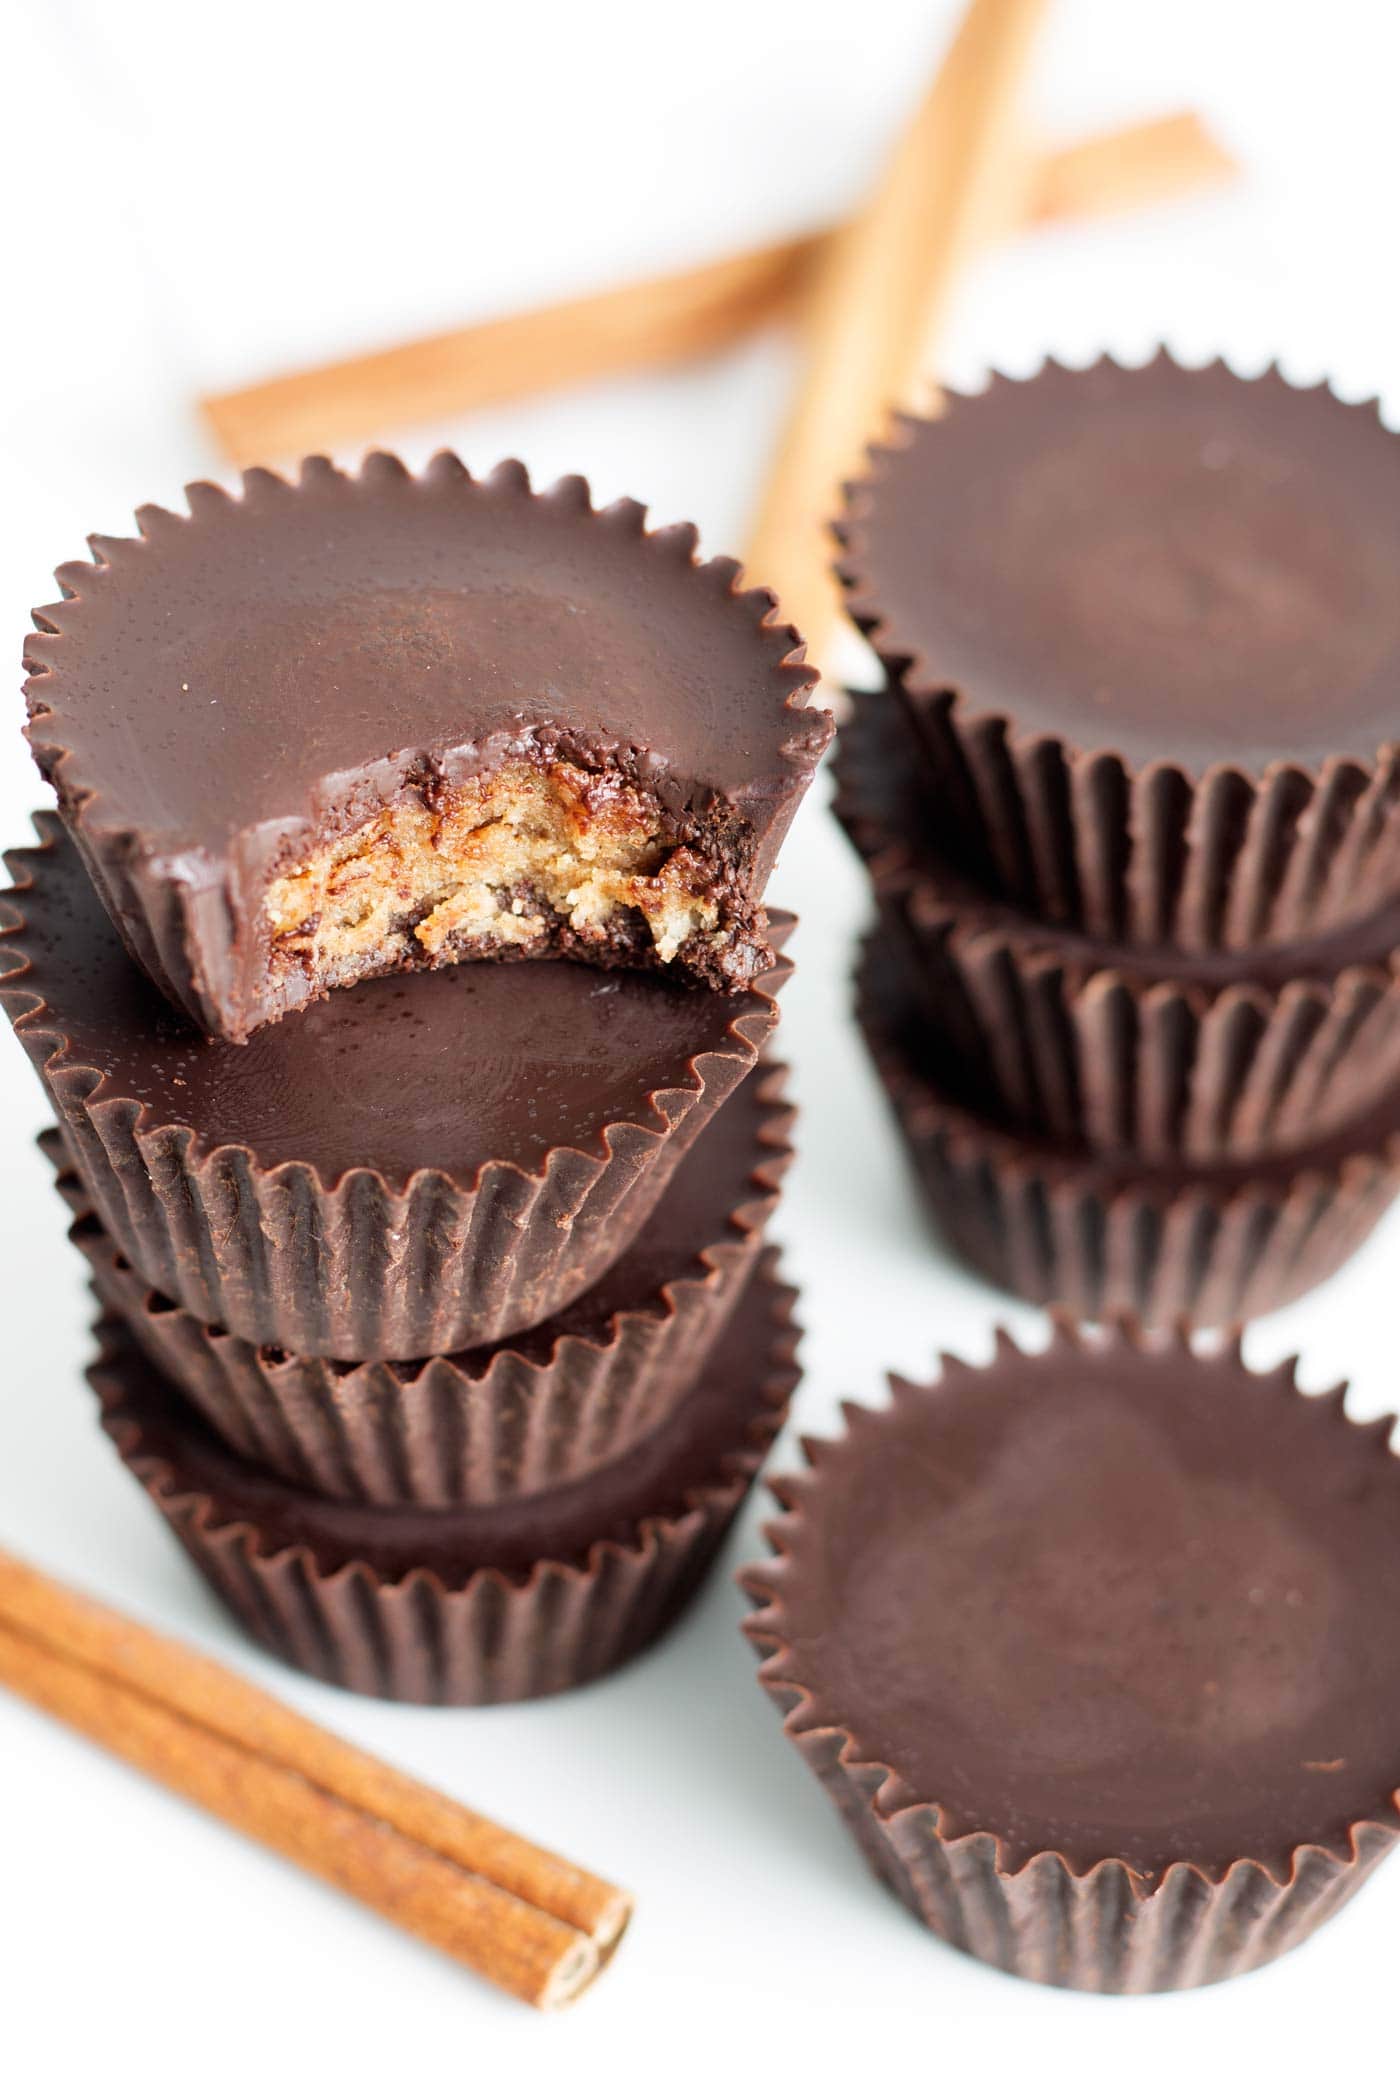 Reese's cups made healthy and spiked with pumpkin pie flavor! This fun fall recipe is easy to make, paleo, dairy free, and can be made low carb and keto!